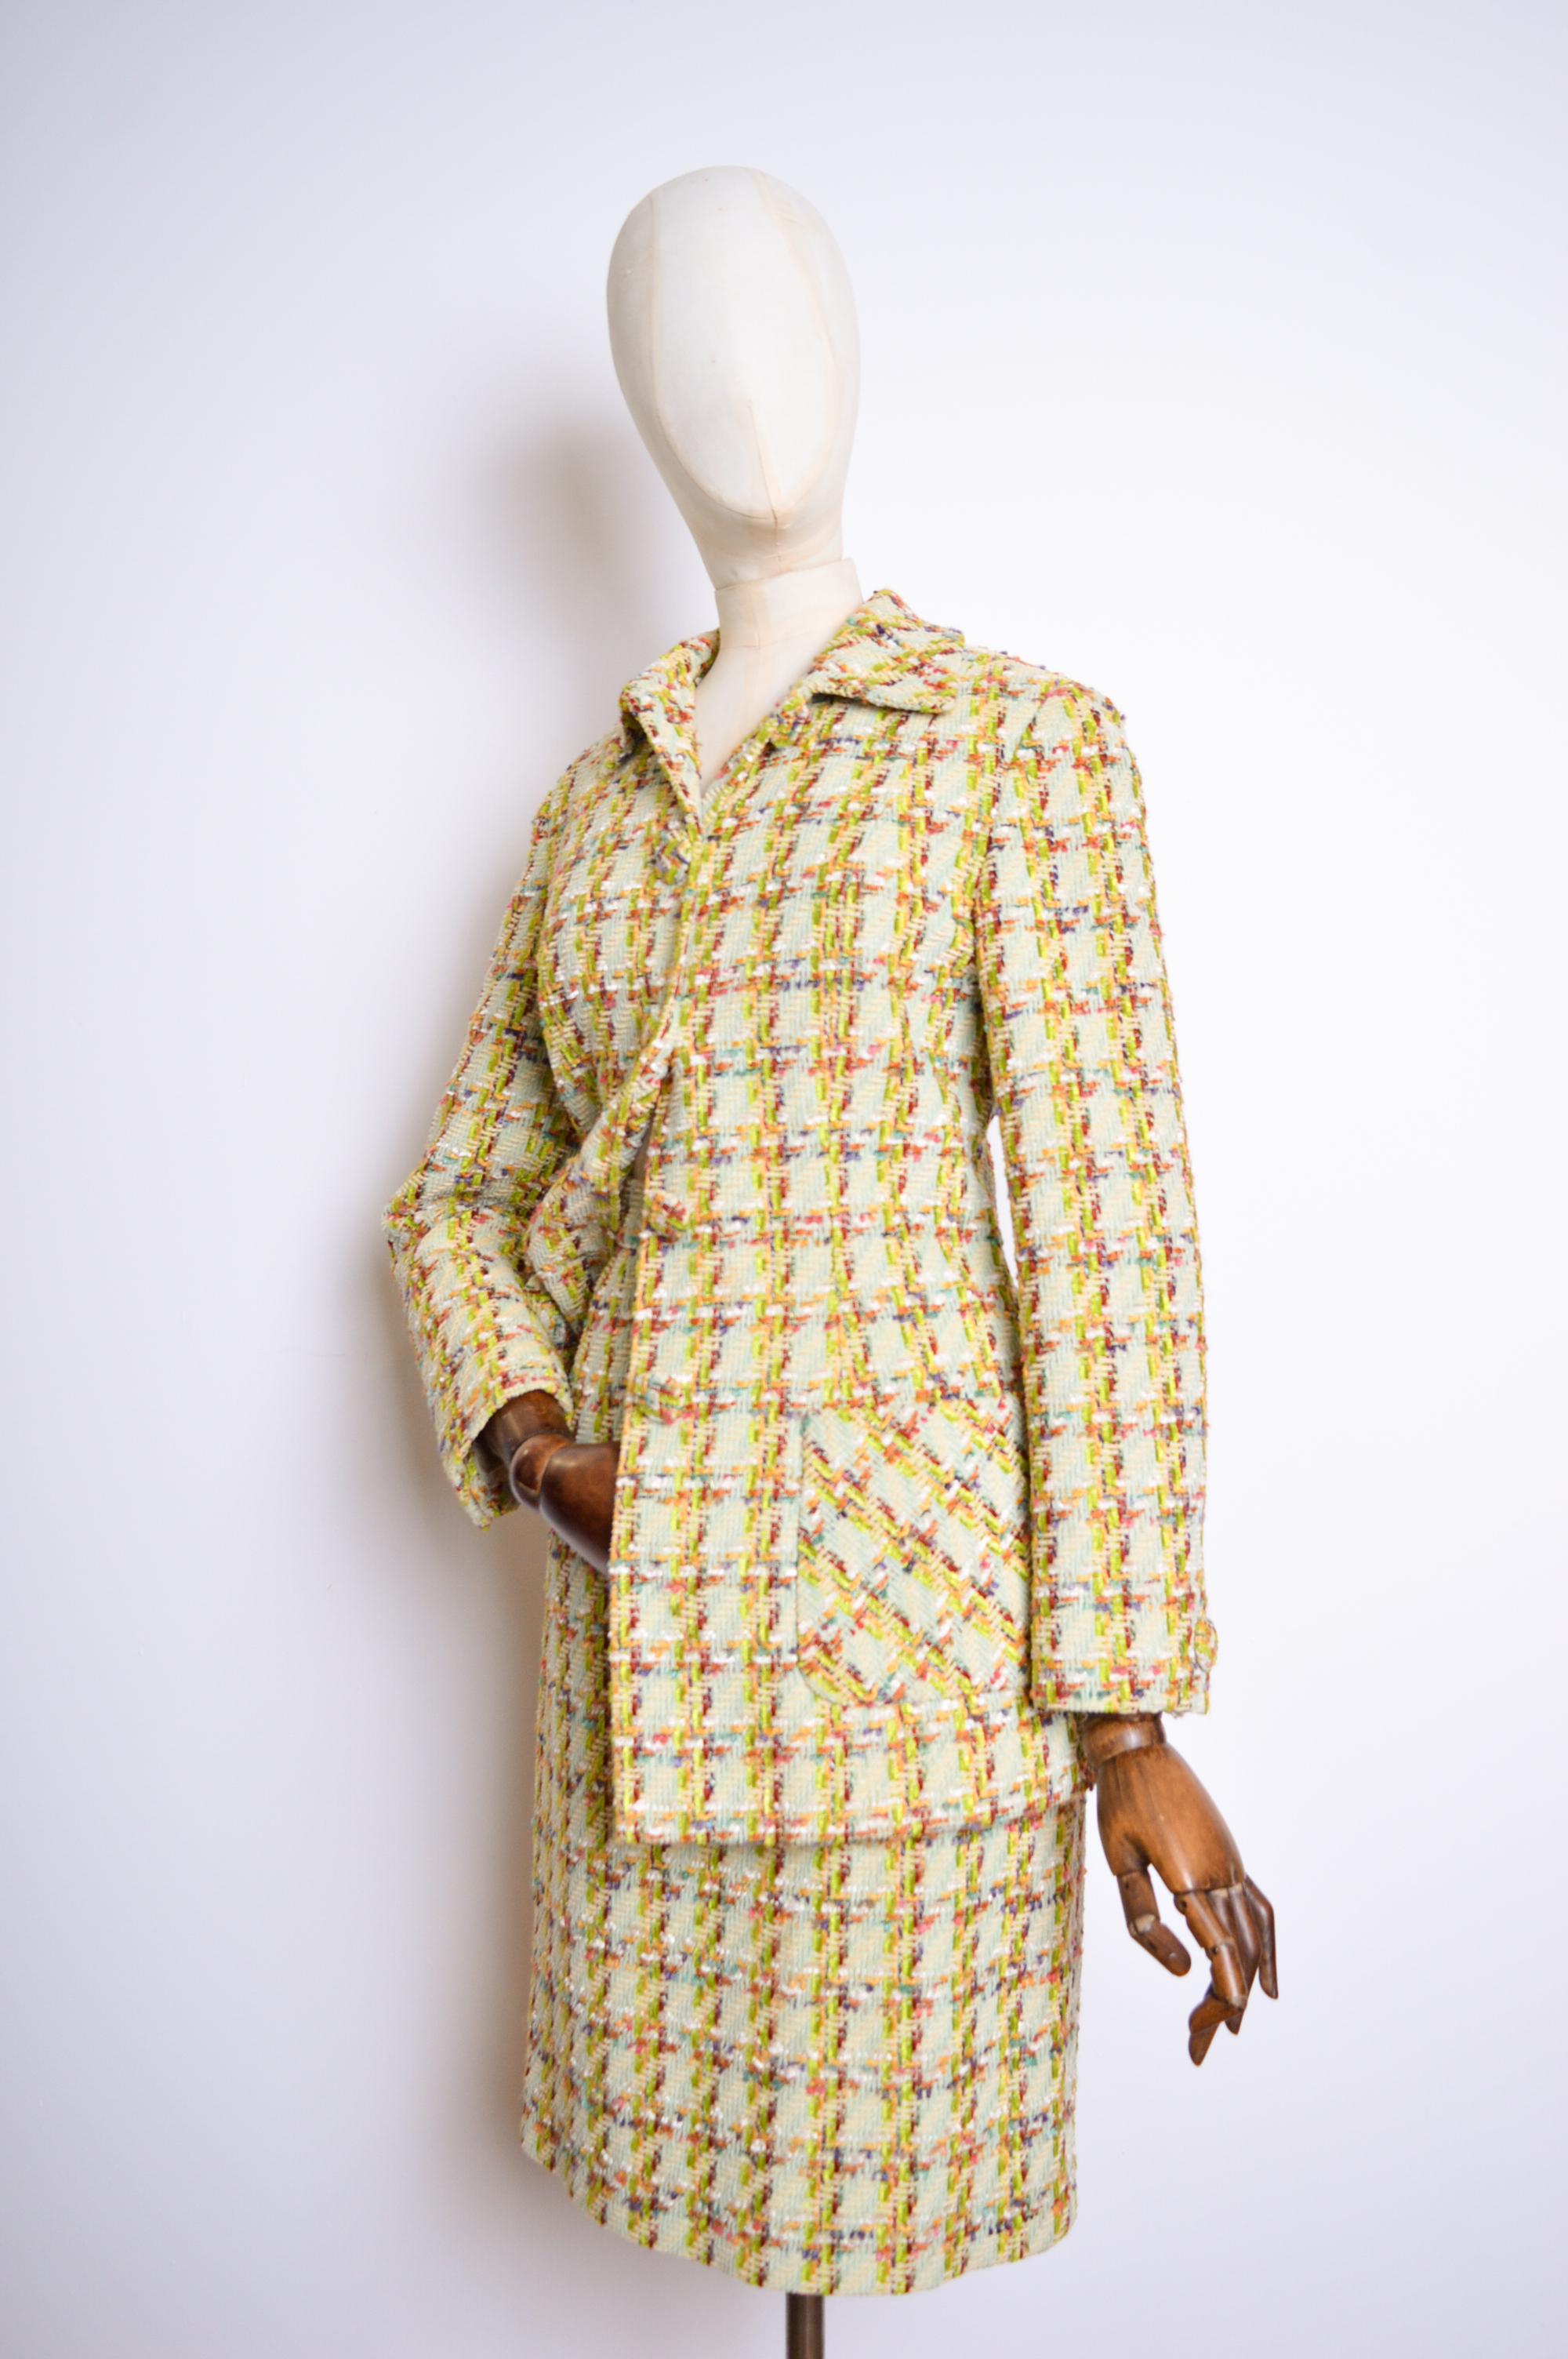 S/S 1993 ROCHAS Jewel Tone Lime Green Tweed Boucle Jacket & Skirt Matching Set For Sale 9